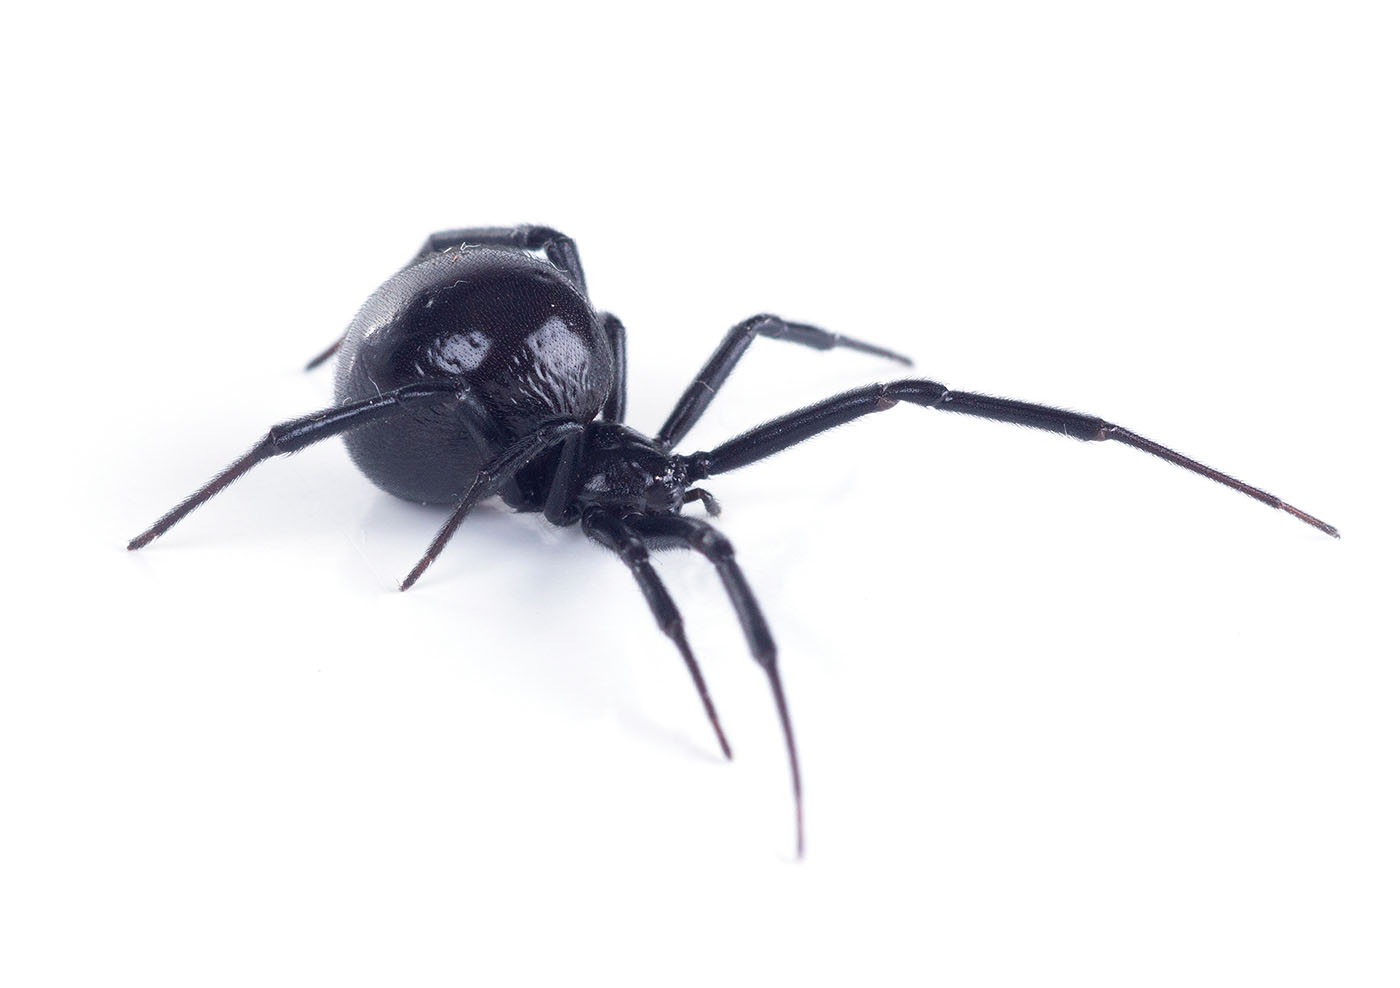 A black spider - contact GGA Pest Management for expert spider identification.